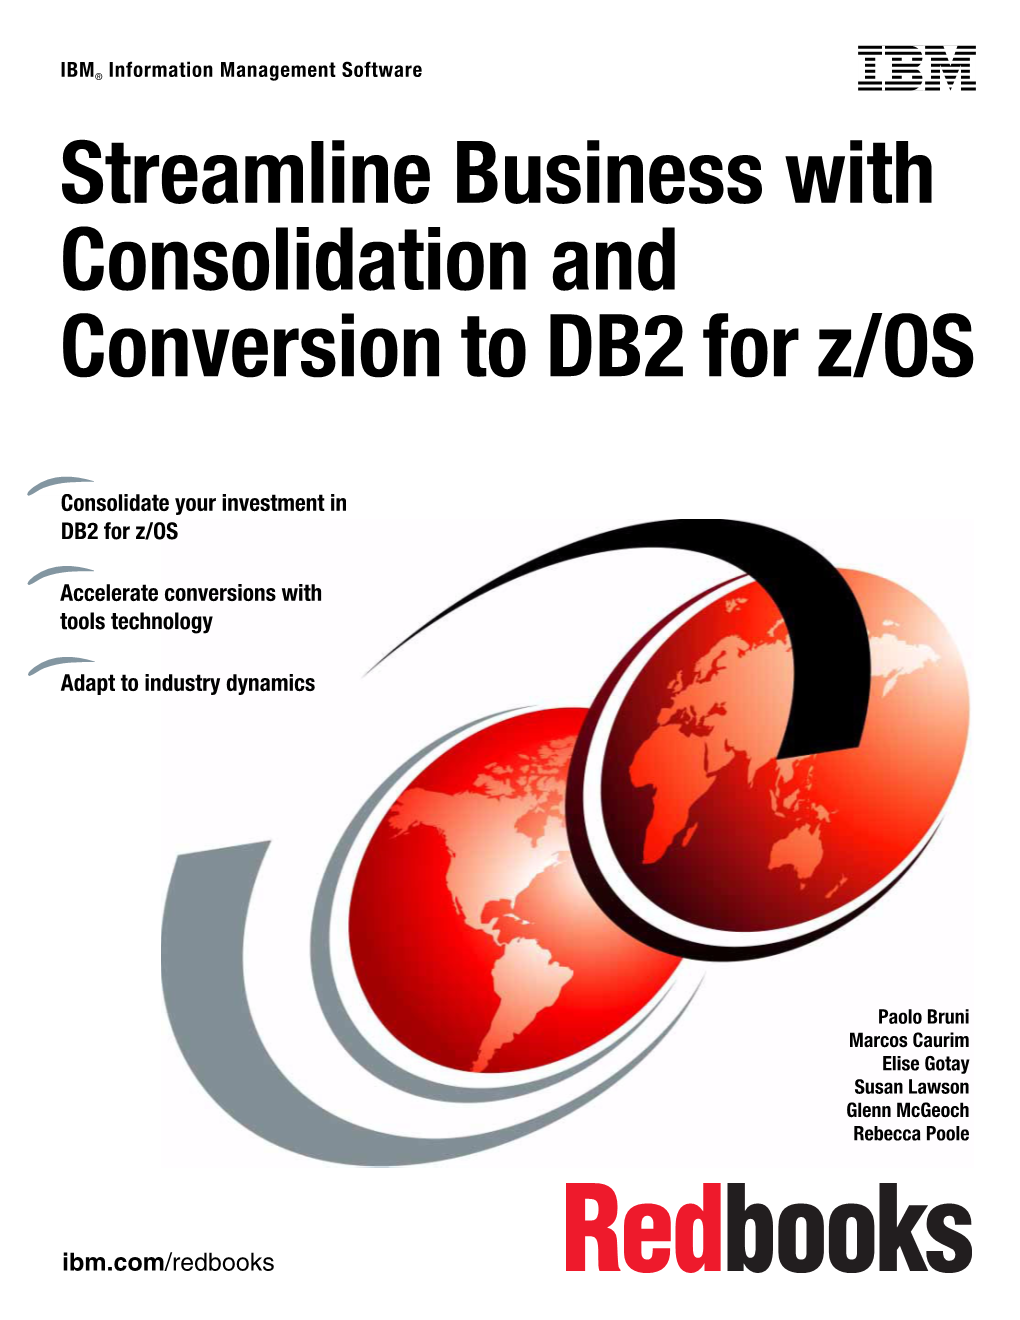 Streamline Business with Consolidation and Conversion to DB2 for Z/OS